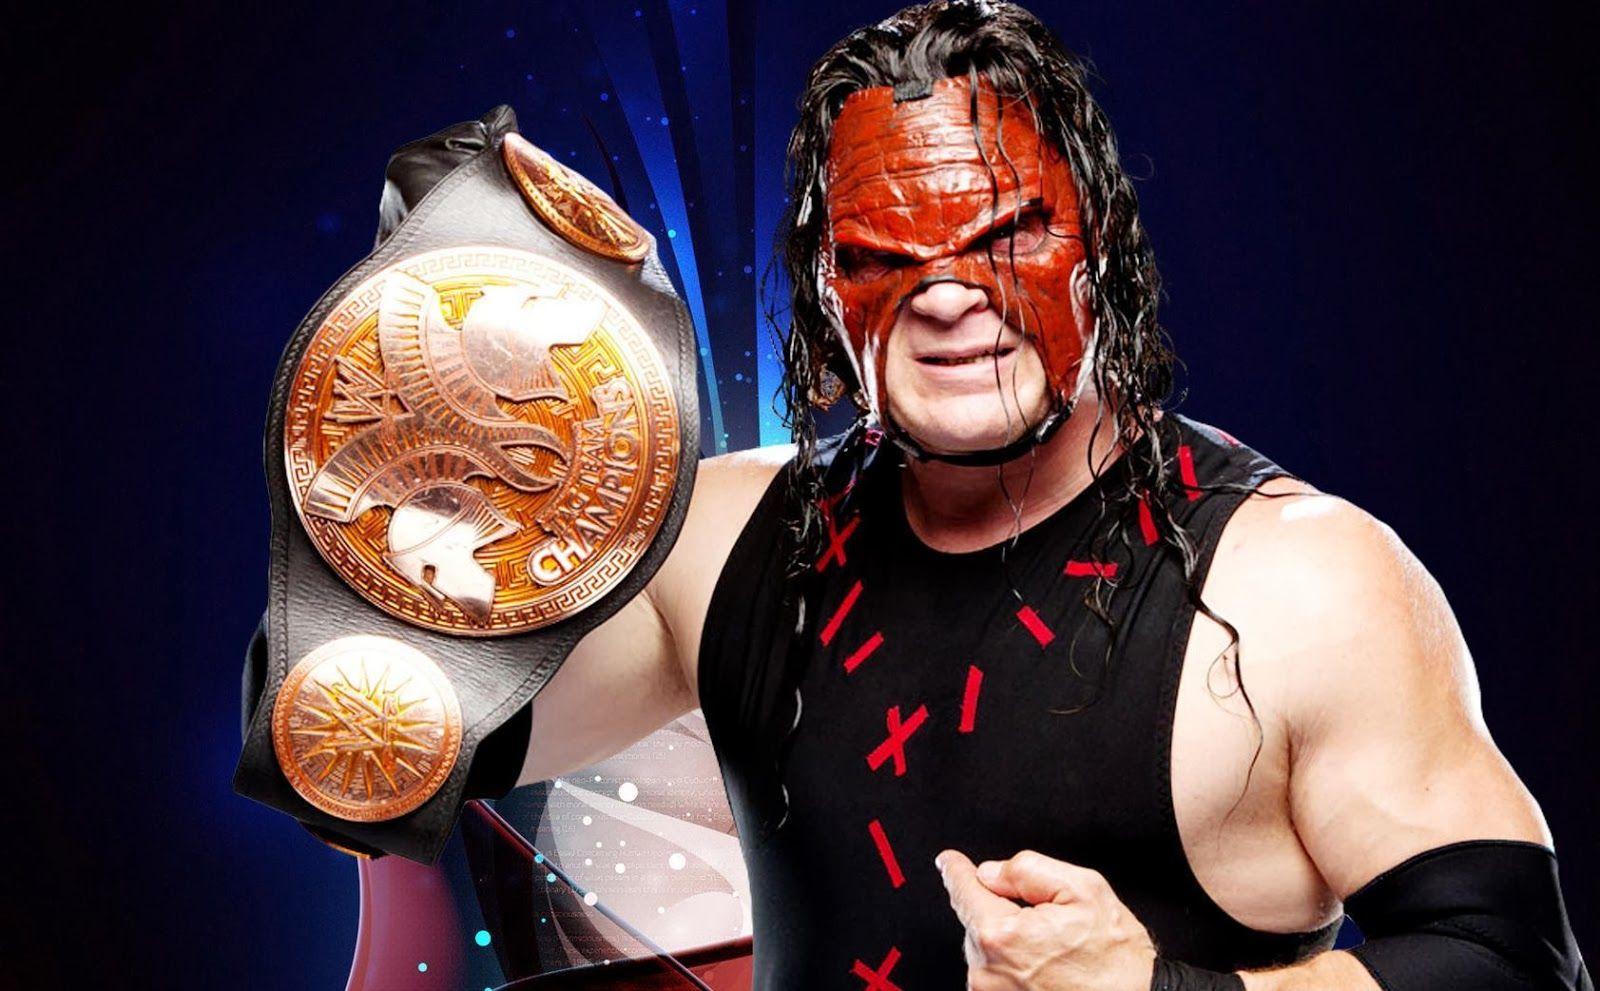 Pin by Ares on WWE | Wwe wallpapers, Kane wwe, Wwe